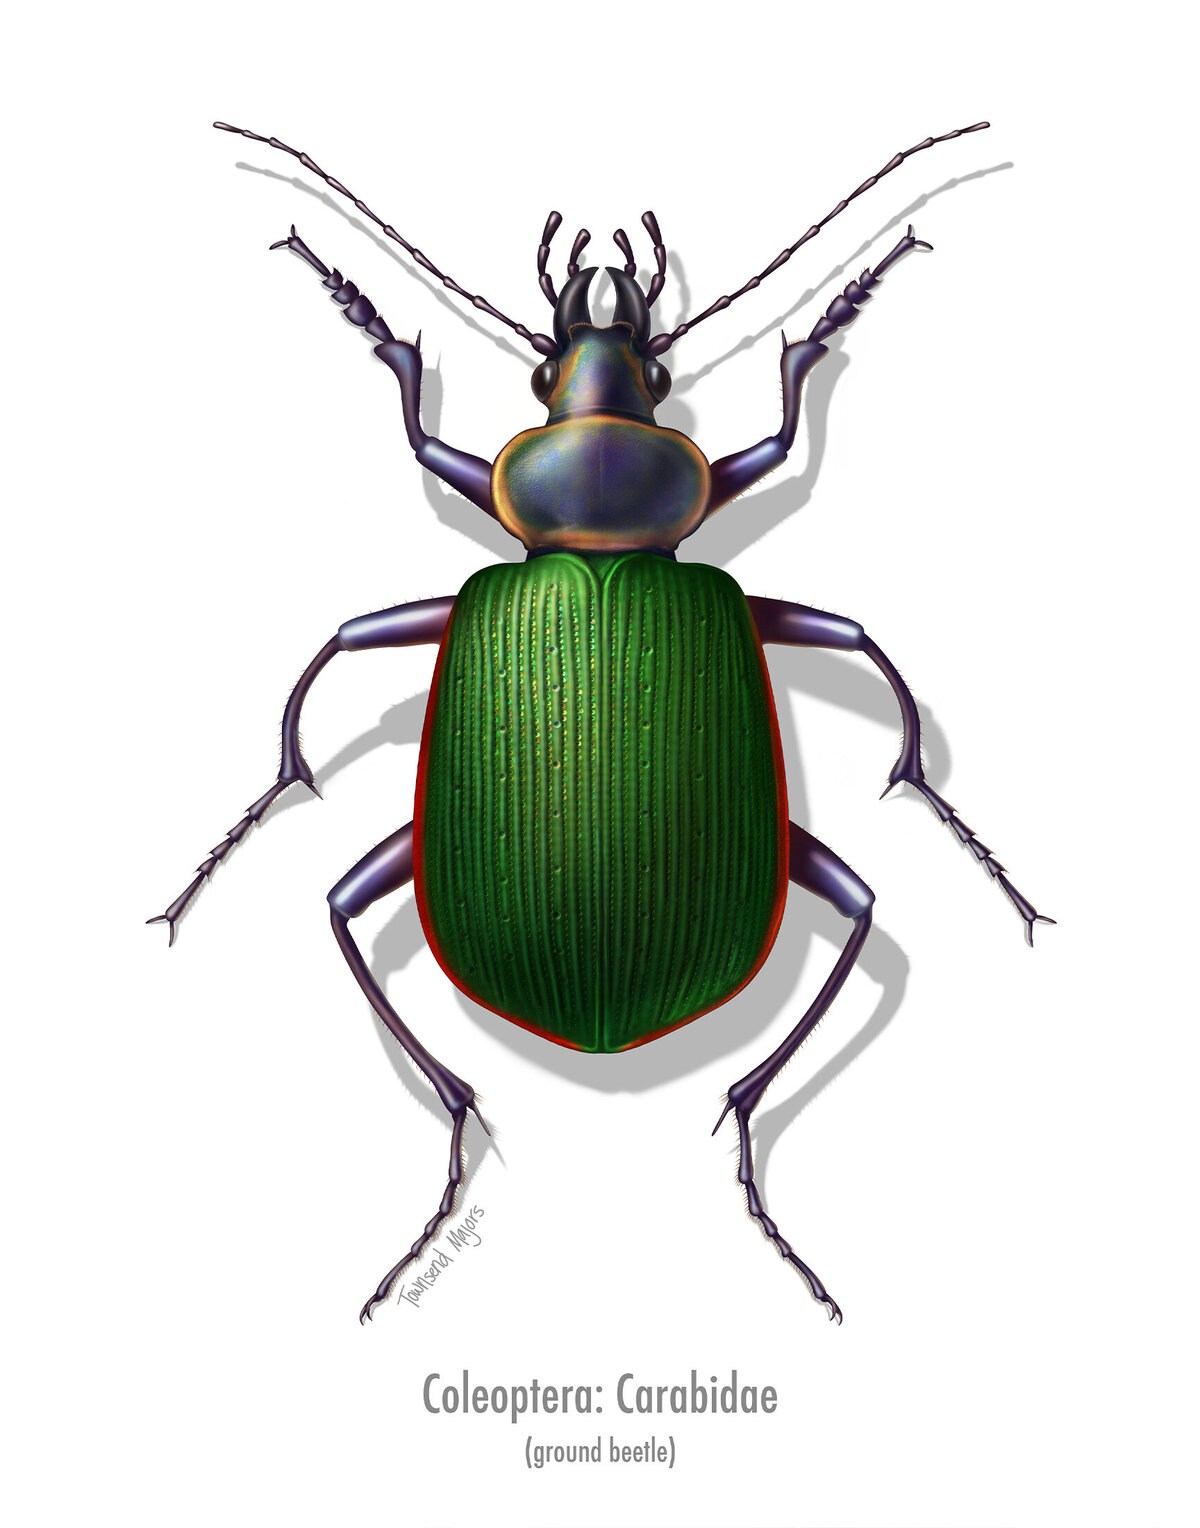 Townsend Majors' illustration of a ground beetle